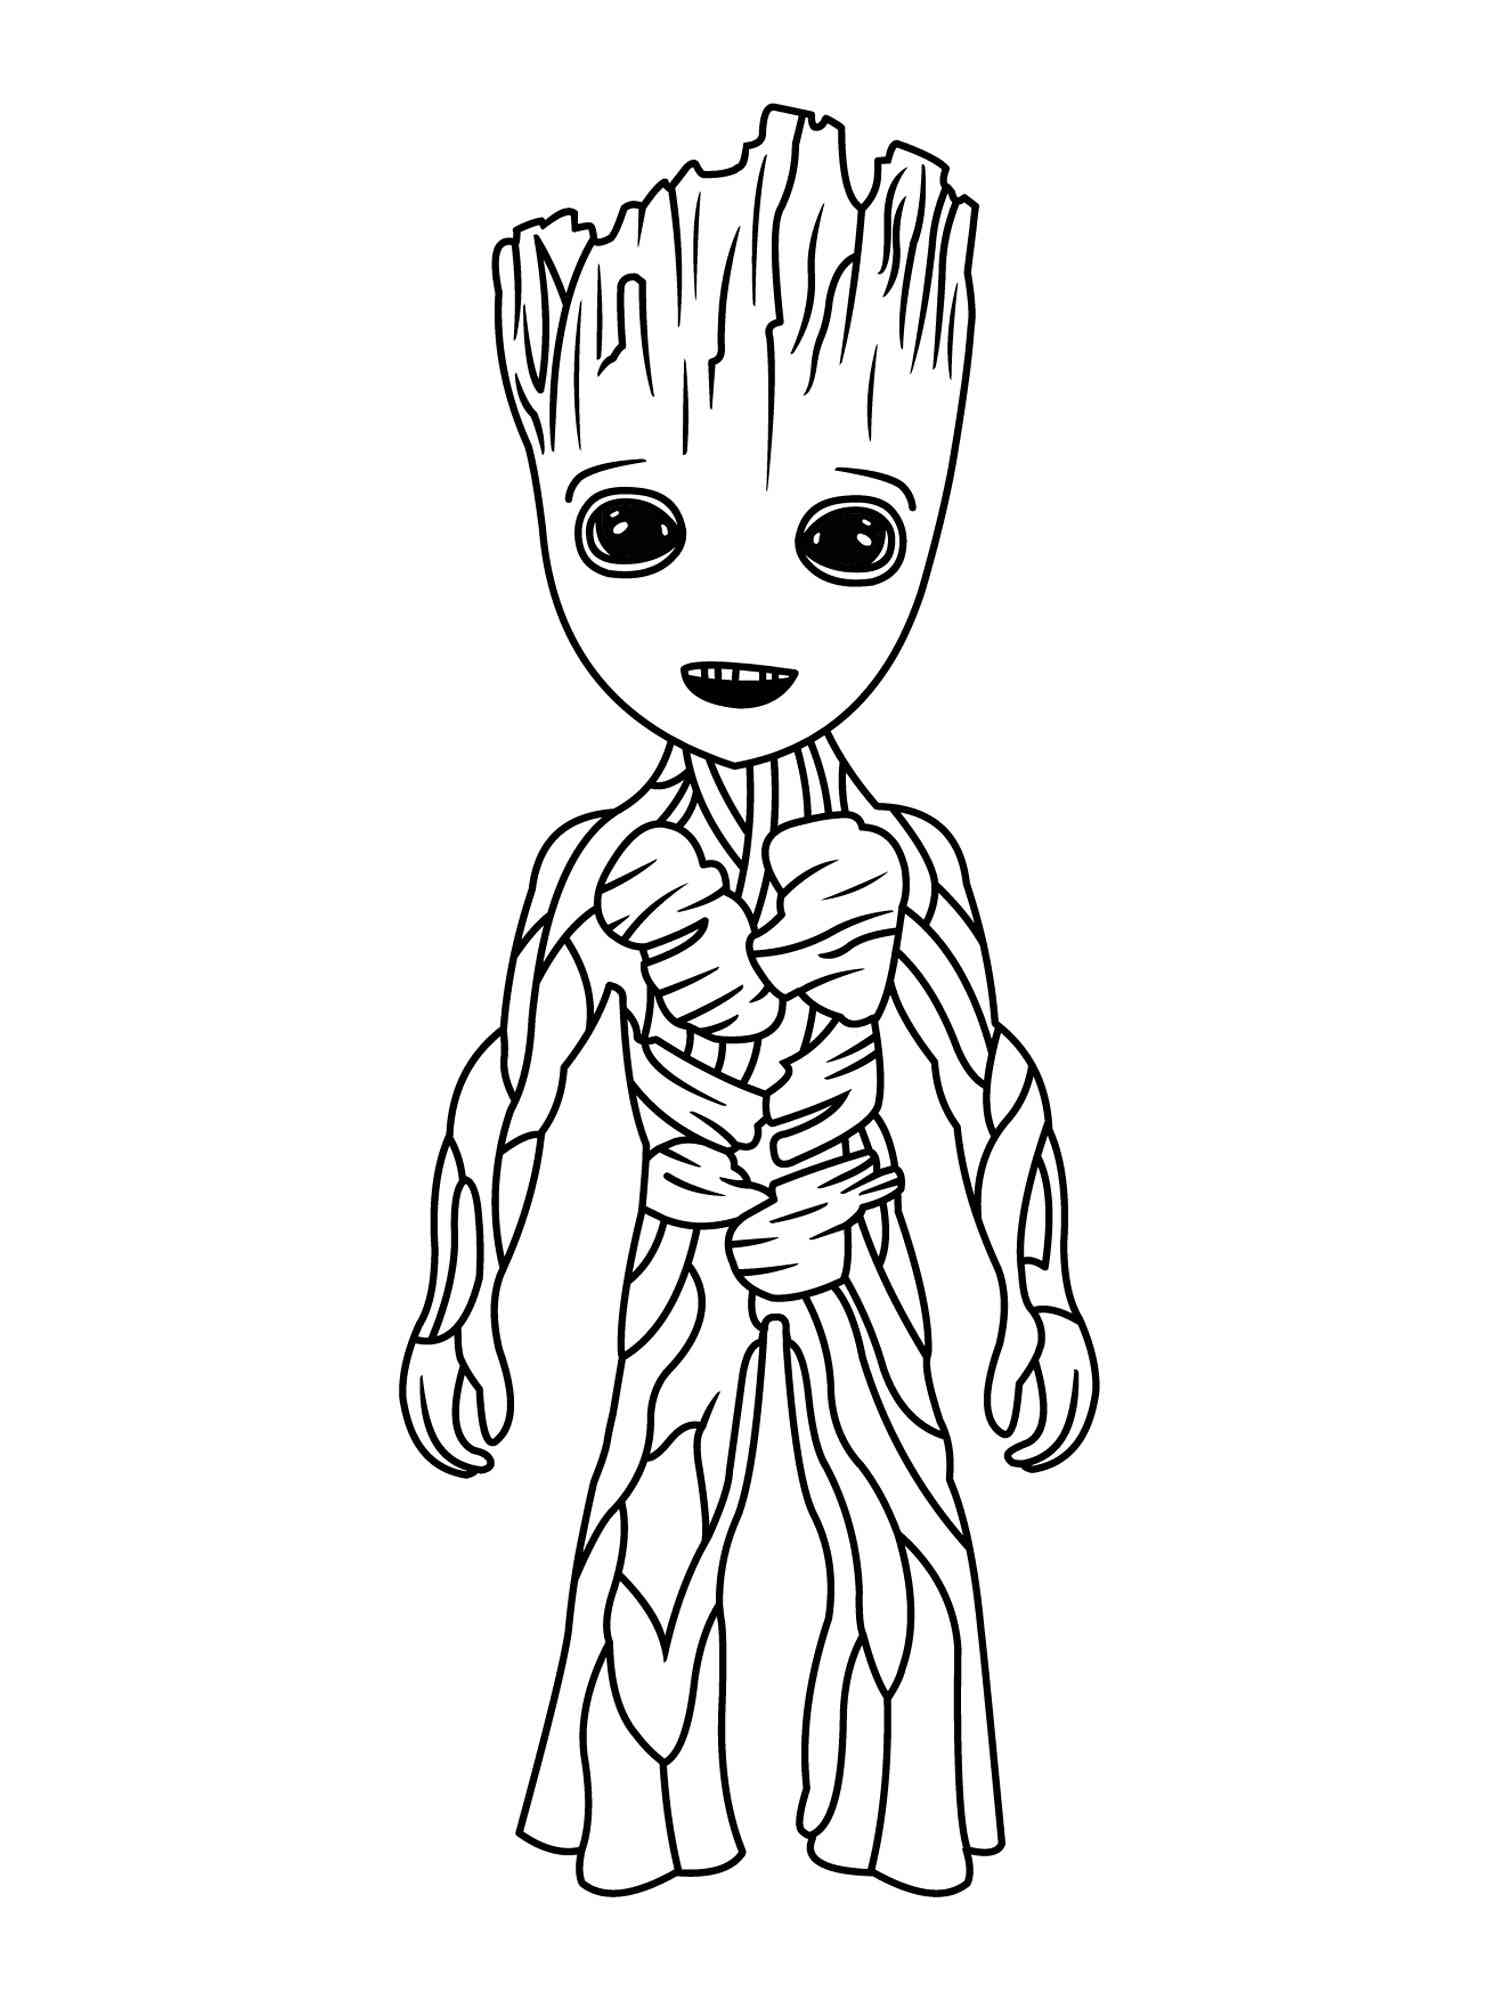 Groot 8 coloring page